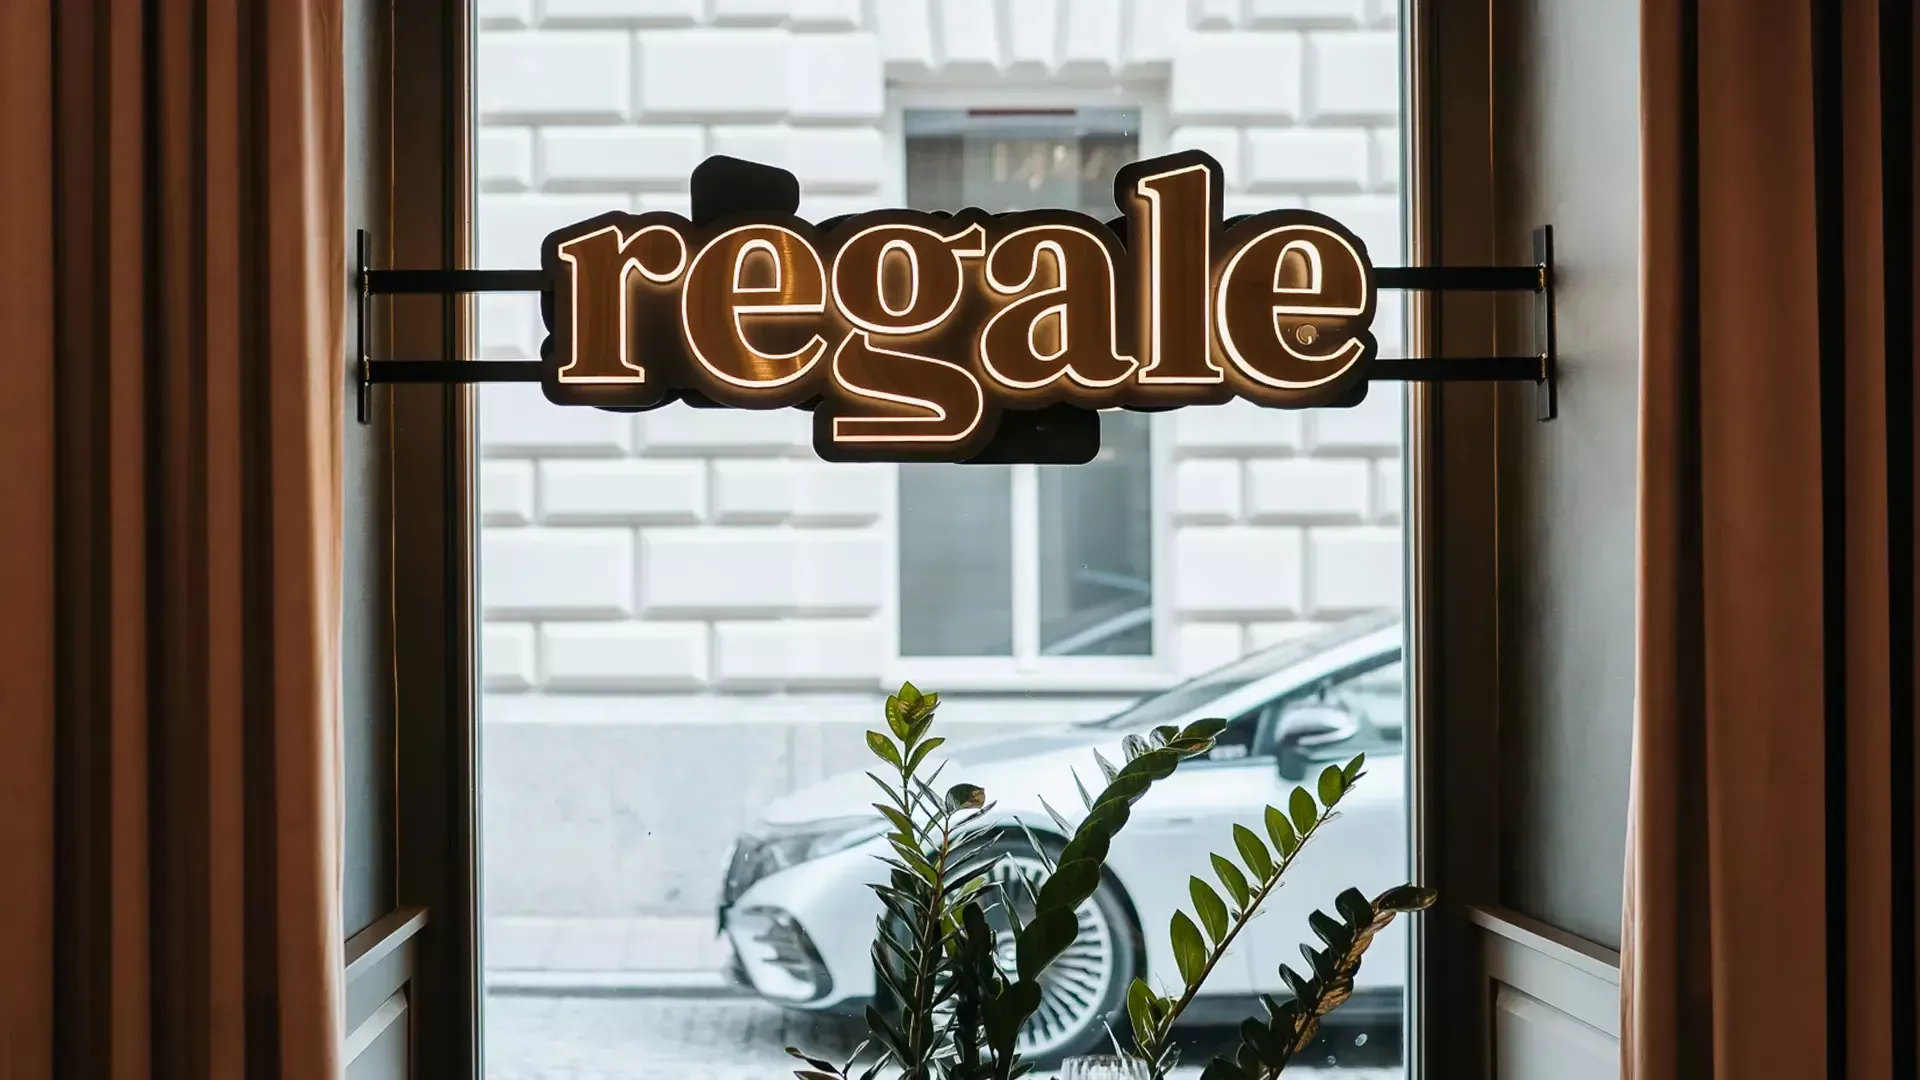 LED Regale Letters - LED letters illuminating the side of Regale